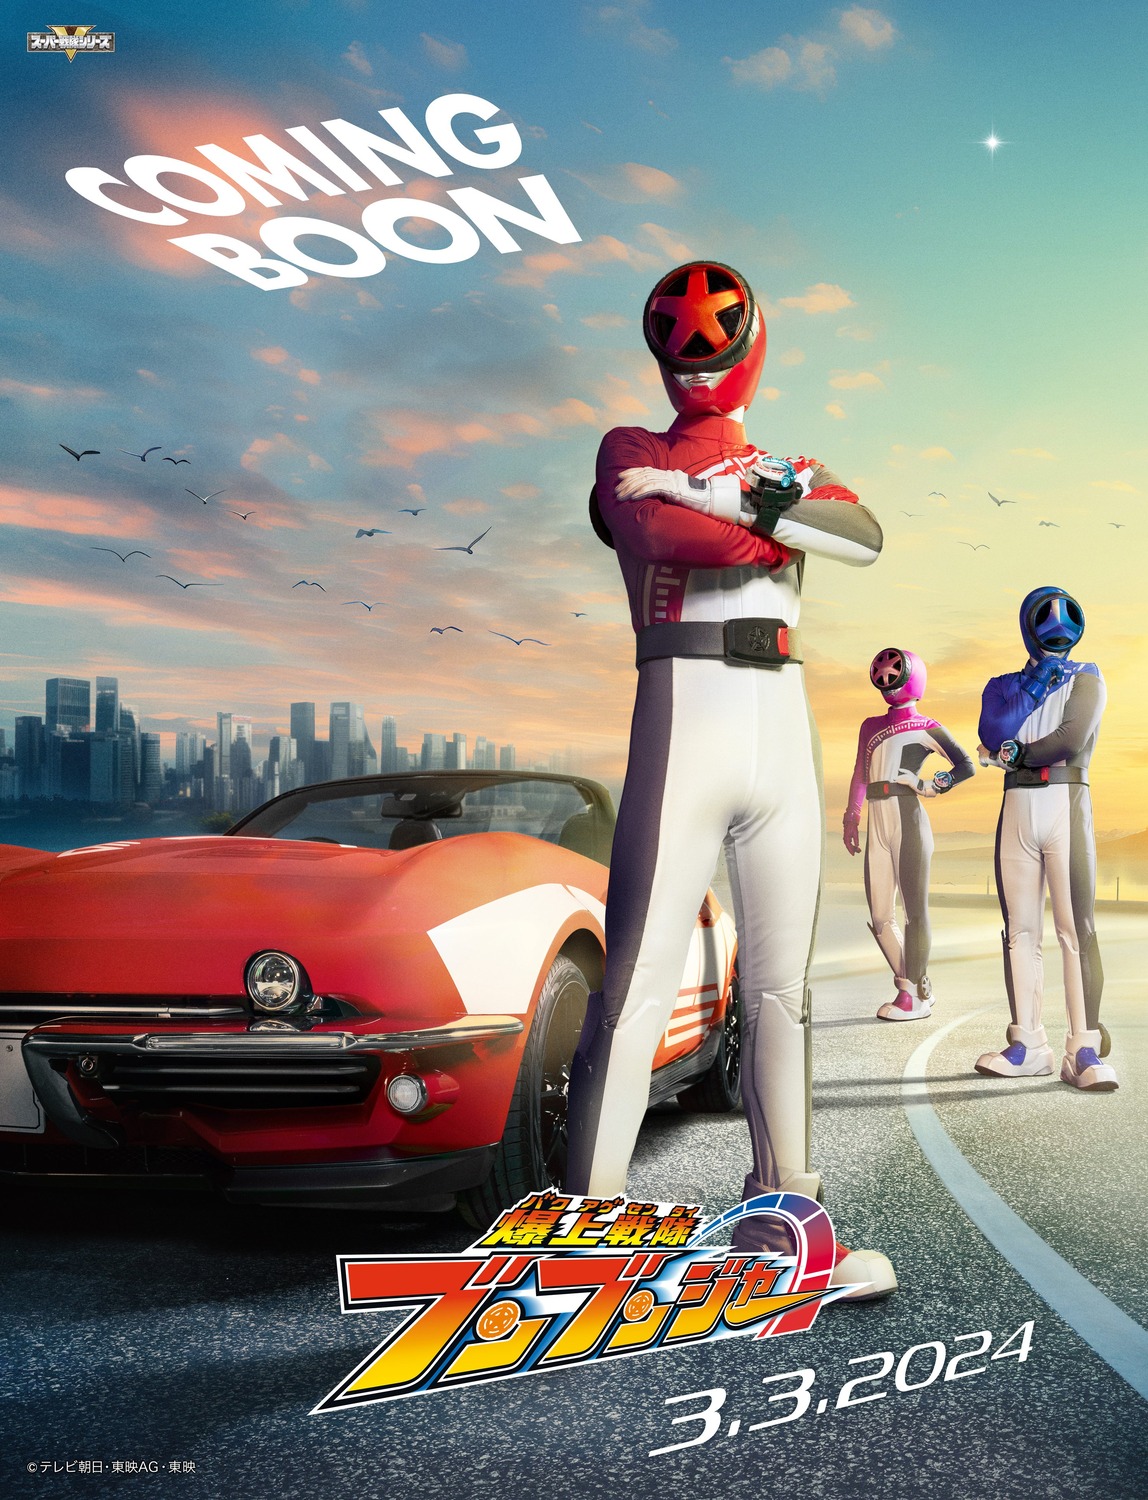 Extra Large TV Poster Image for Bakuage Sentai Boonboomger (#1 of 3)